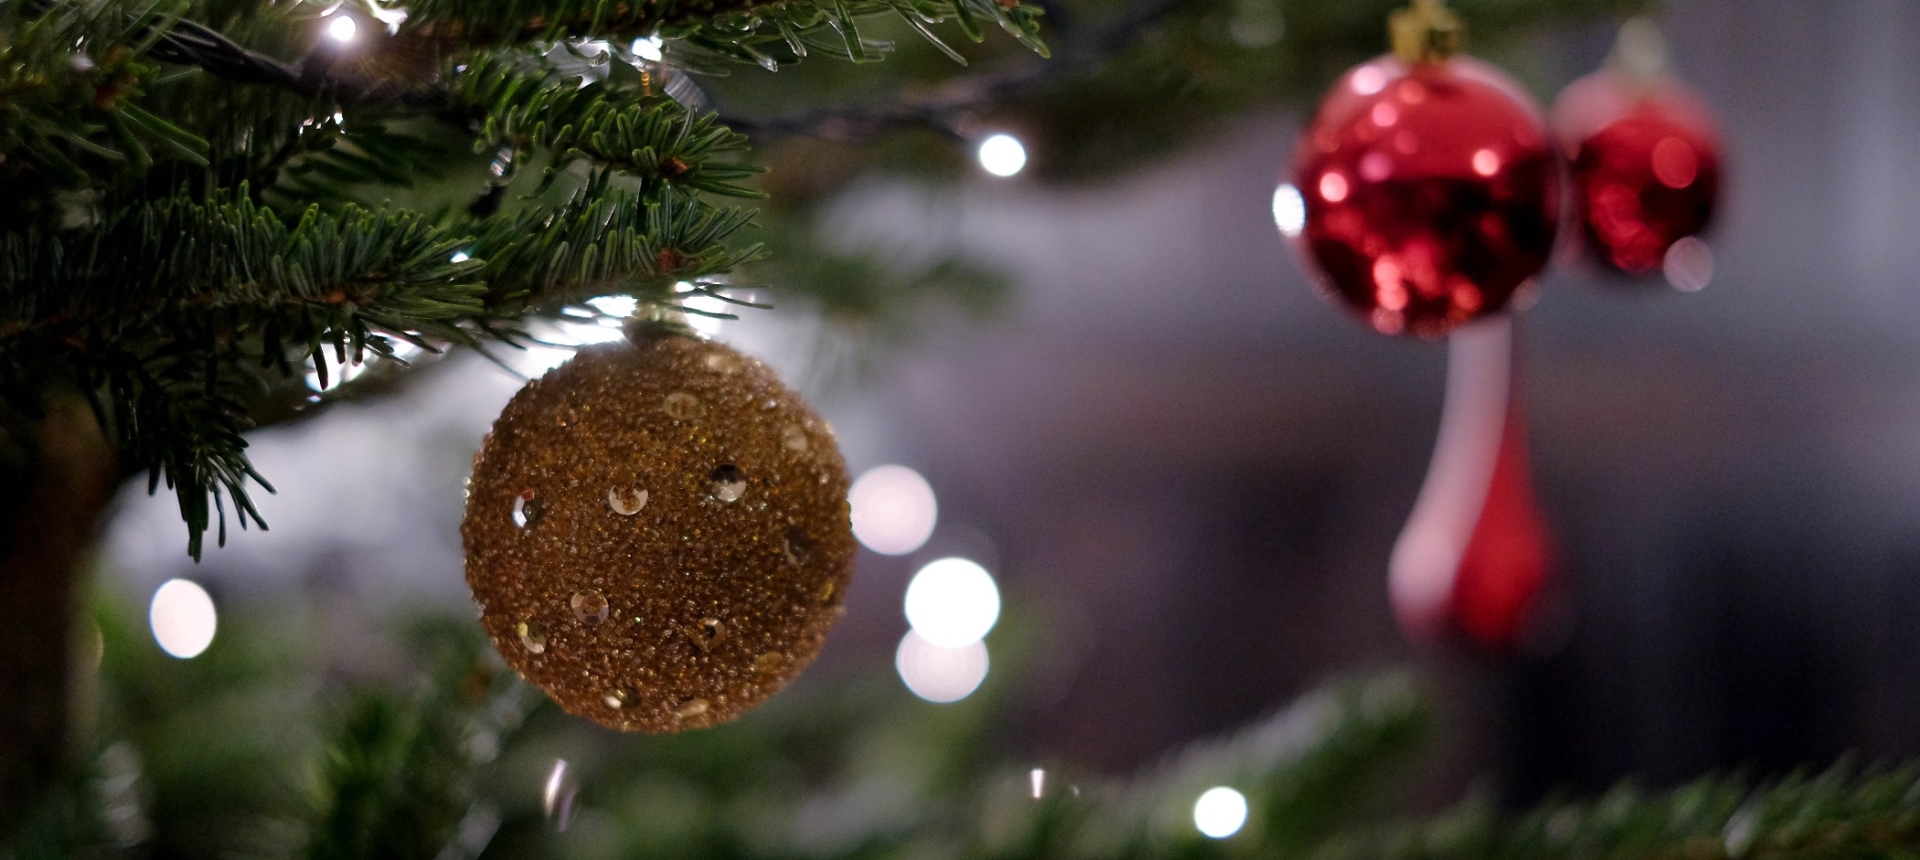 A gold sparkly ball and a red Christmas ornament handing on the branch of a tree